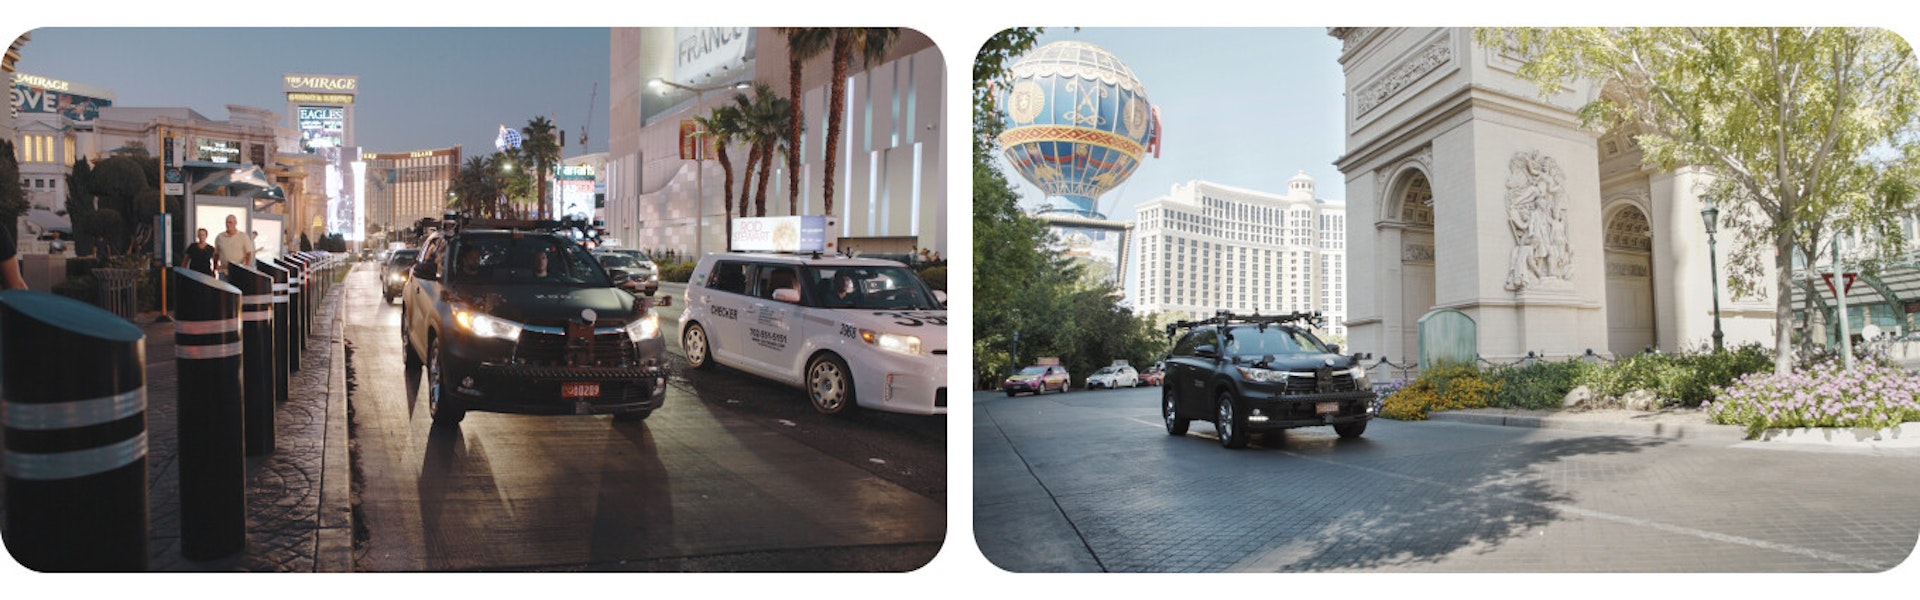 zoox las vegas location with test vehicles driving on the road